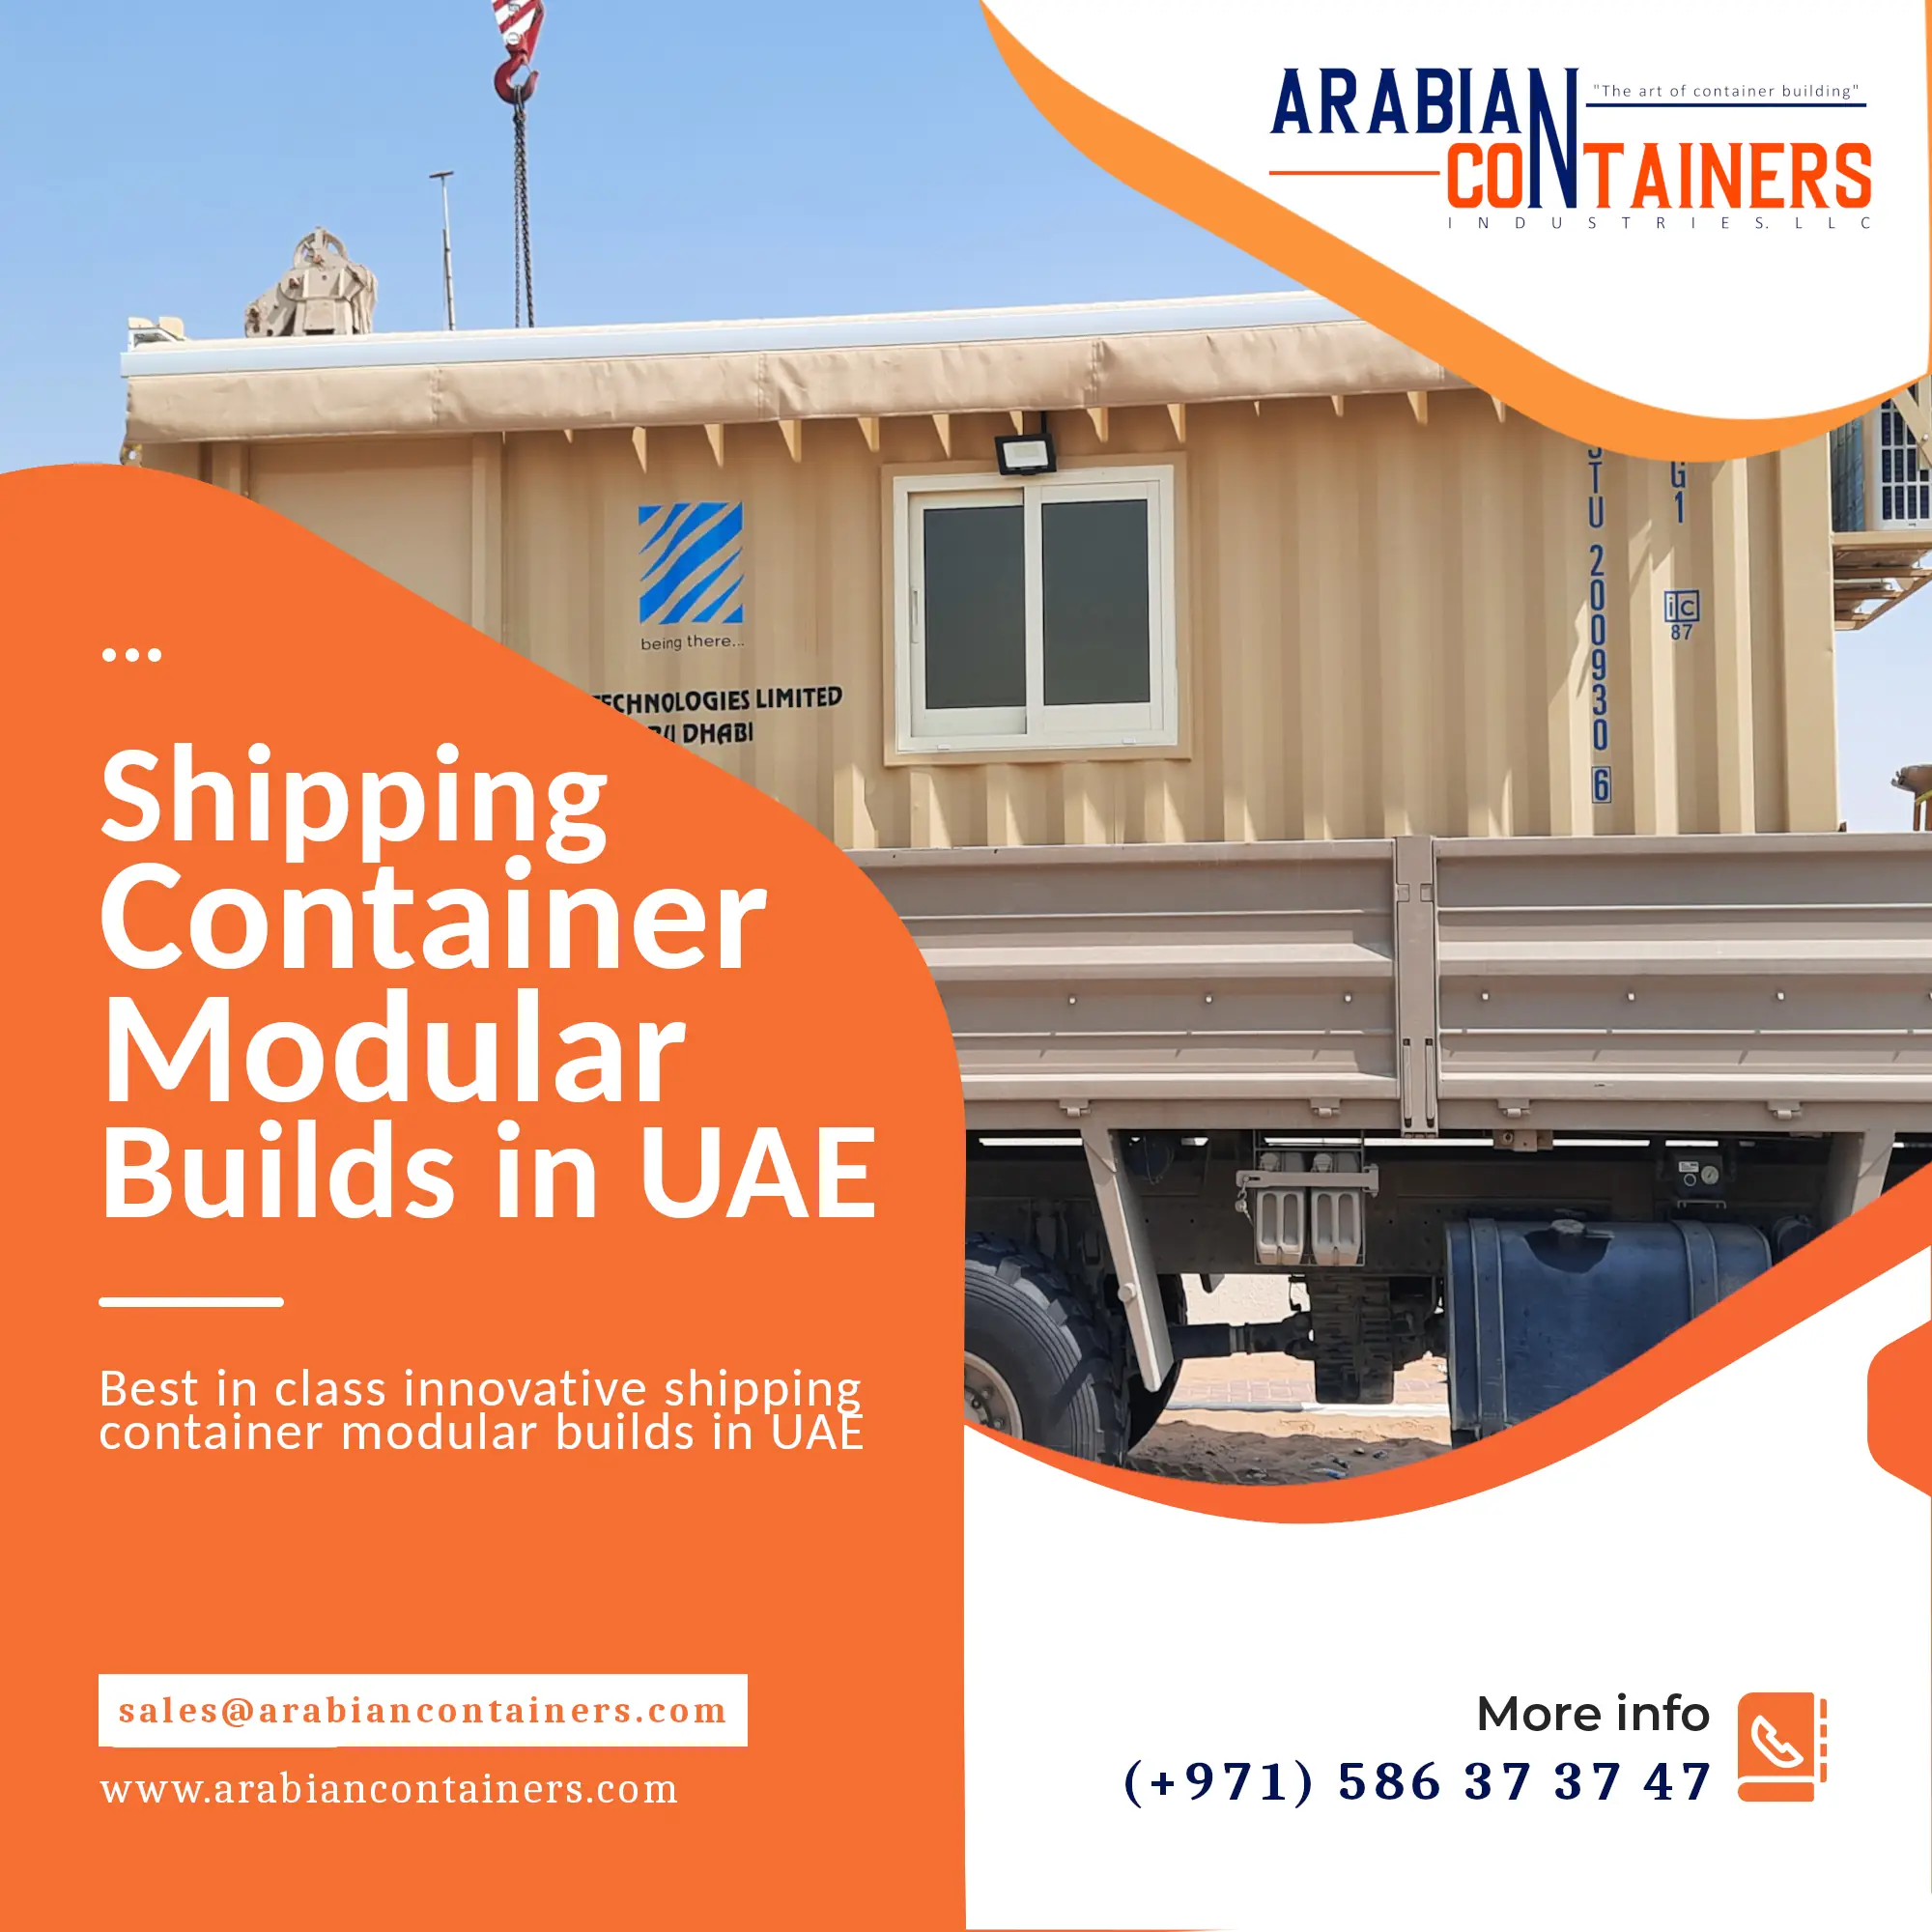 Modular Building Solutions Company in the UAE